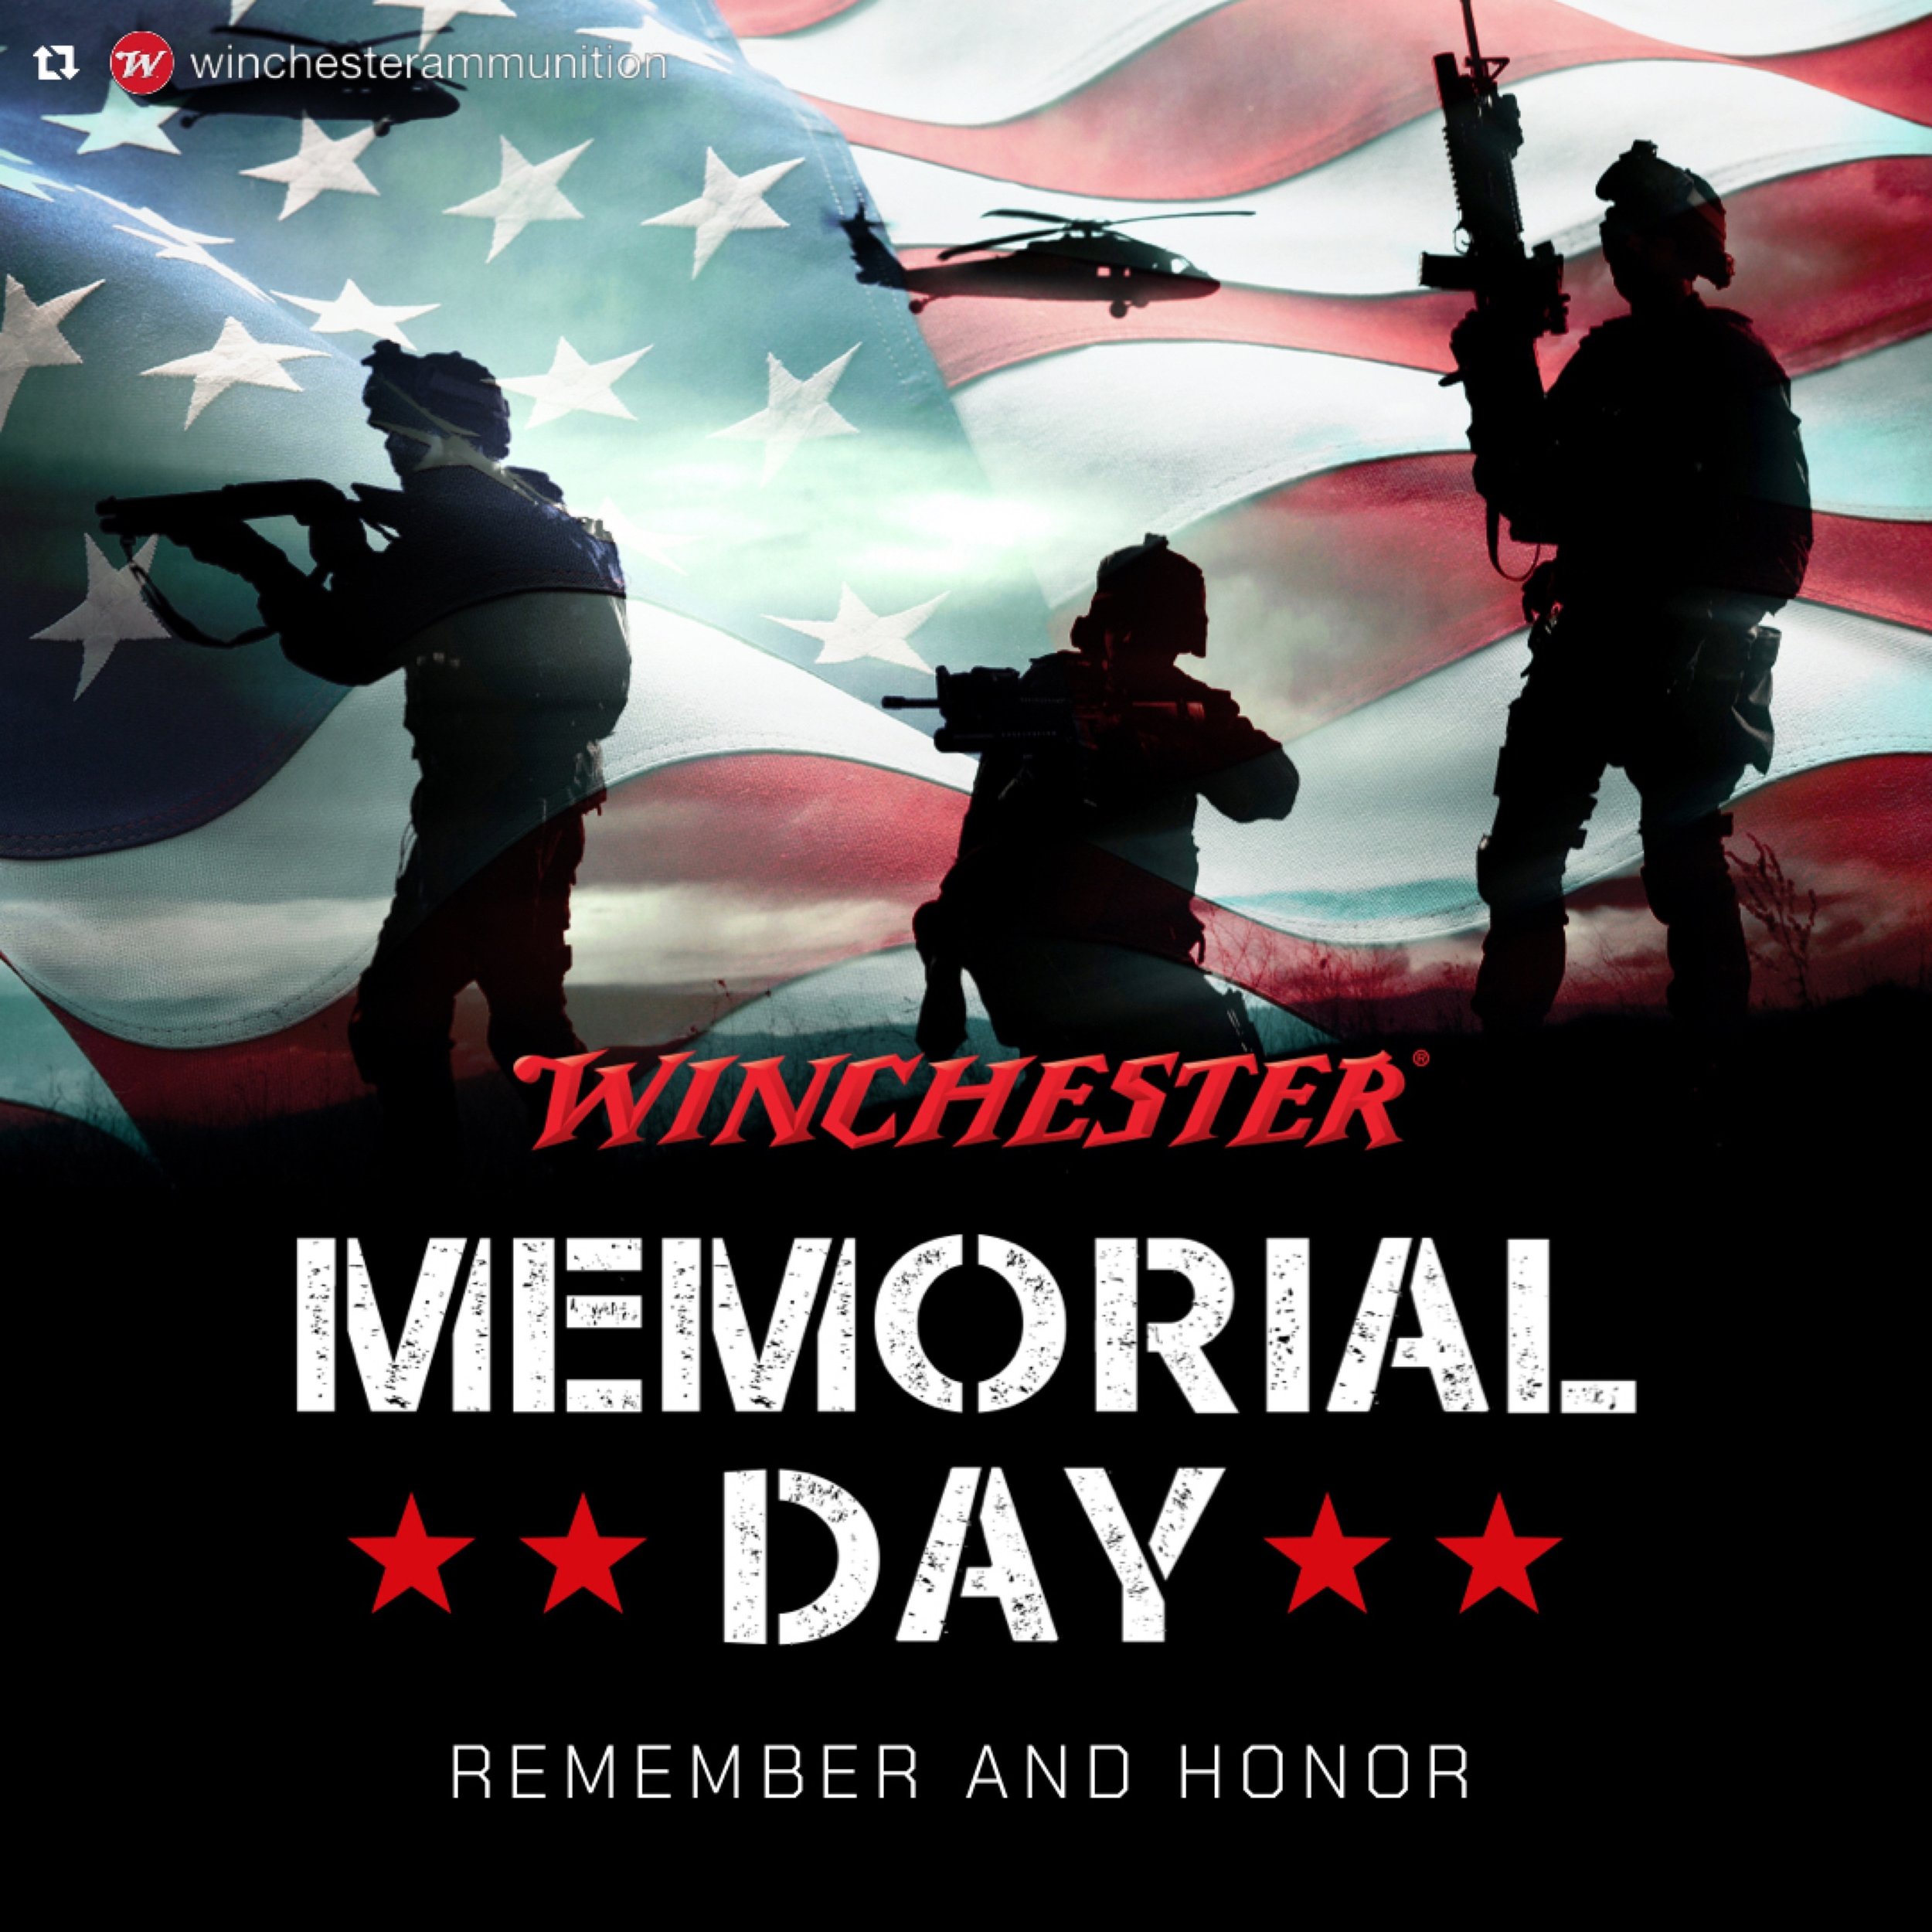 Today, we remember and honor those who sacrificed everything for our freedom. On this #MemorialDay, let&rsquo;s take a moment to reflect on their bravery and unwavering dedication. We will never forget. 🇺🇸
&bull;
Repost from @winchesterammunition